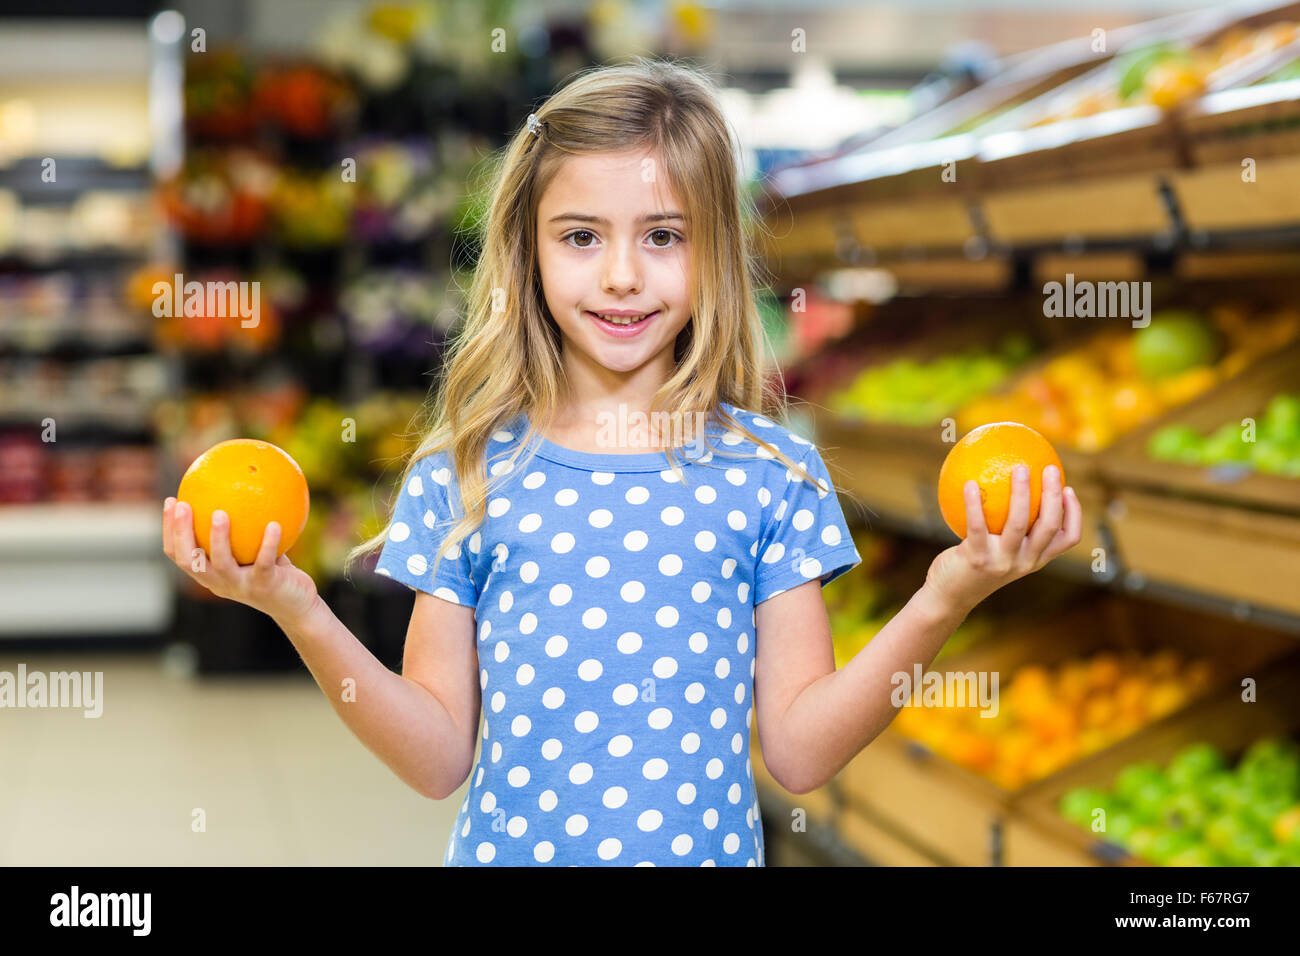 Smiling young girl holding oranges Banque D'Images